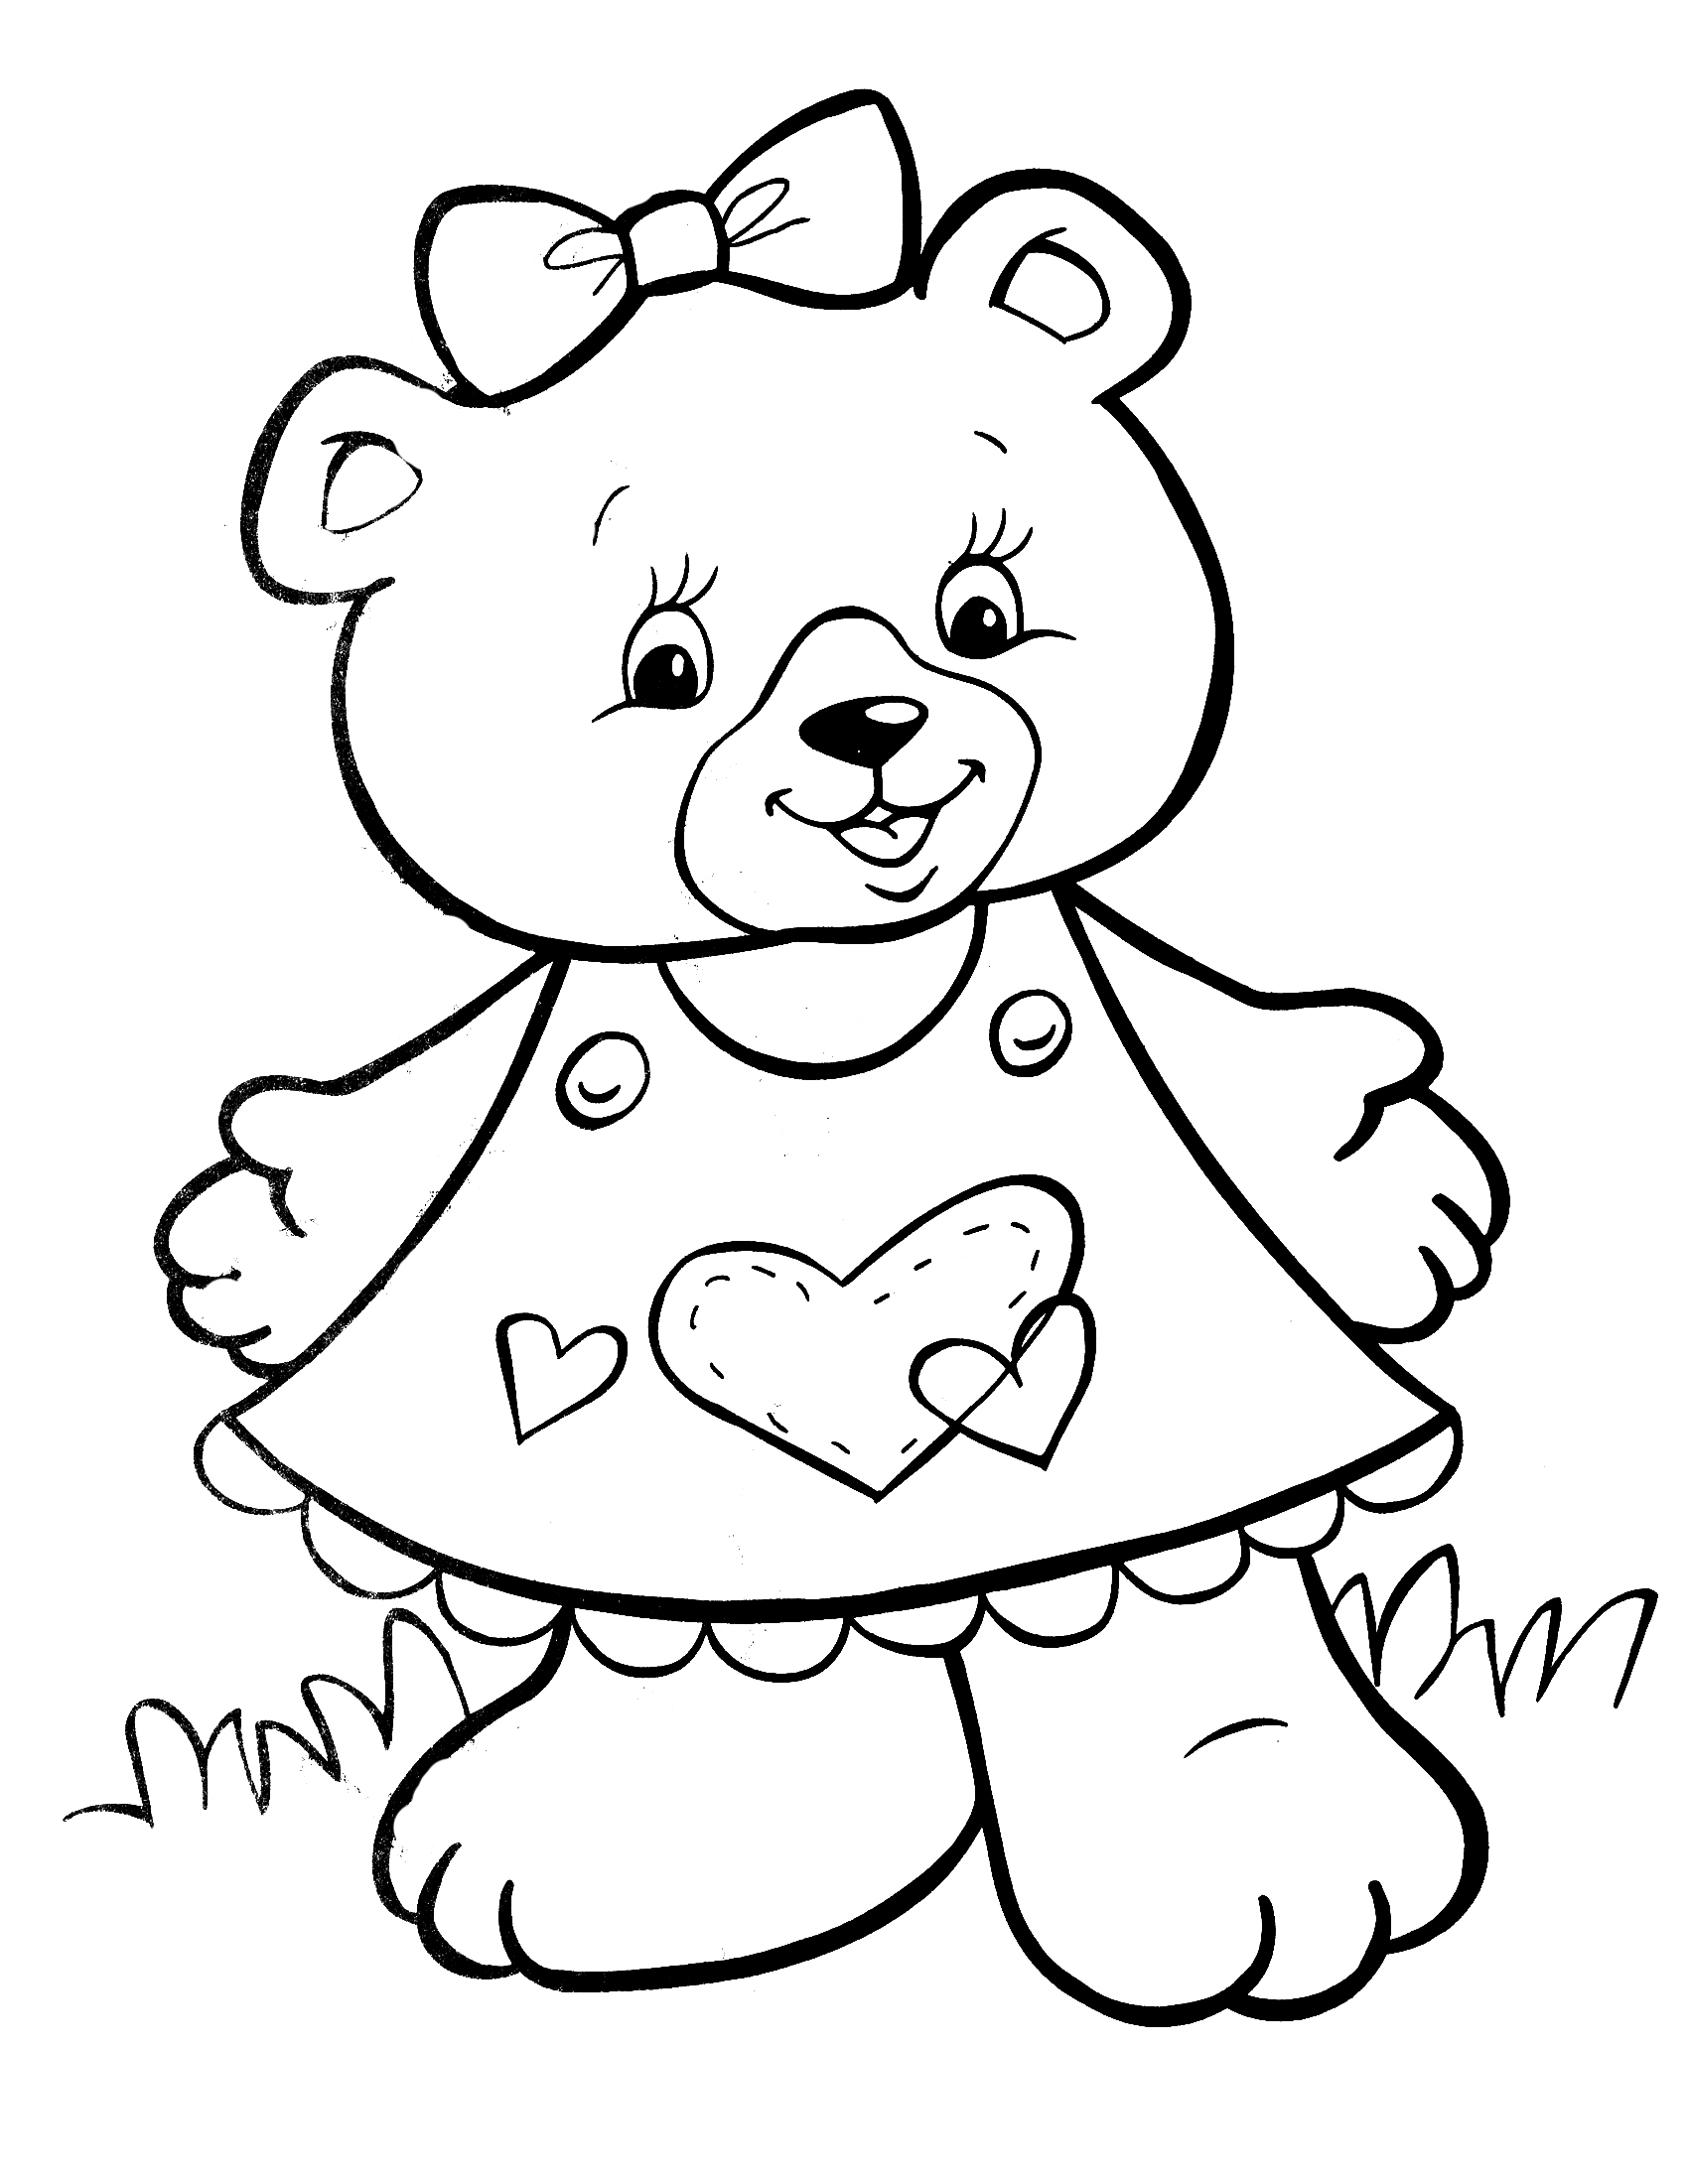 Crayola Lovely Teddy Bear Girls Coloring Page